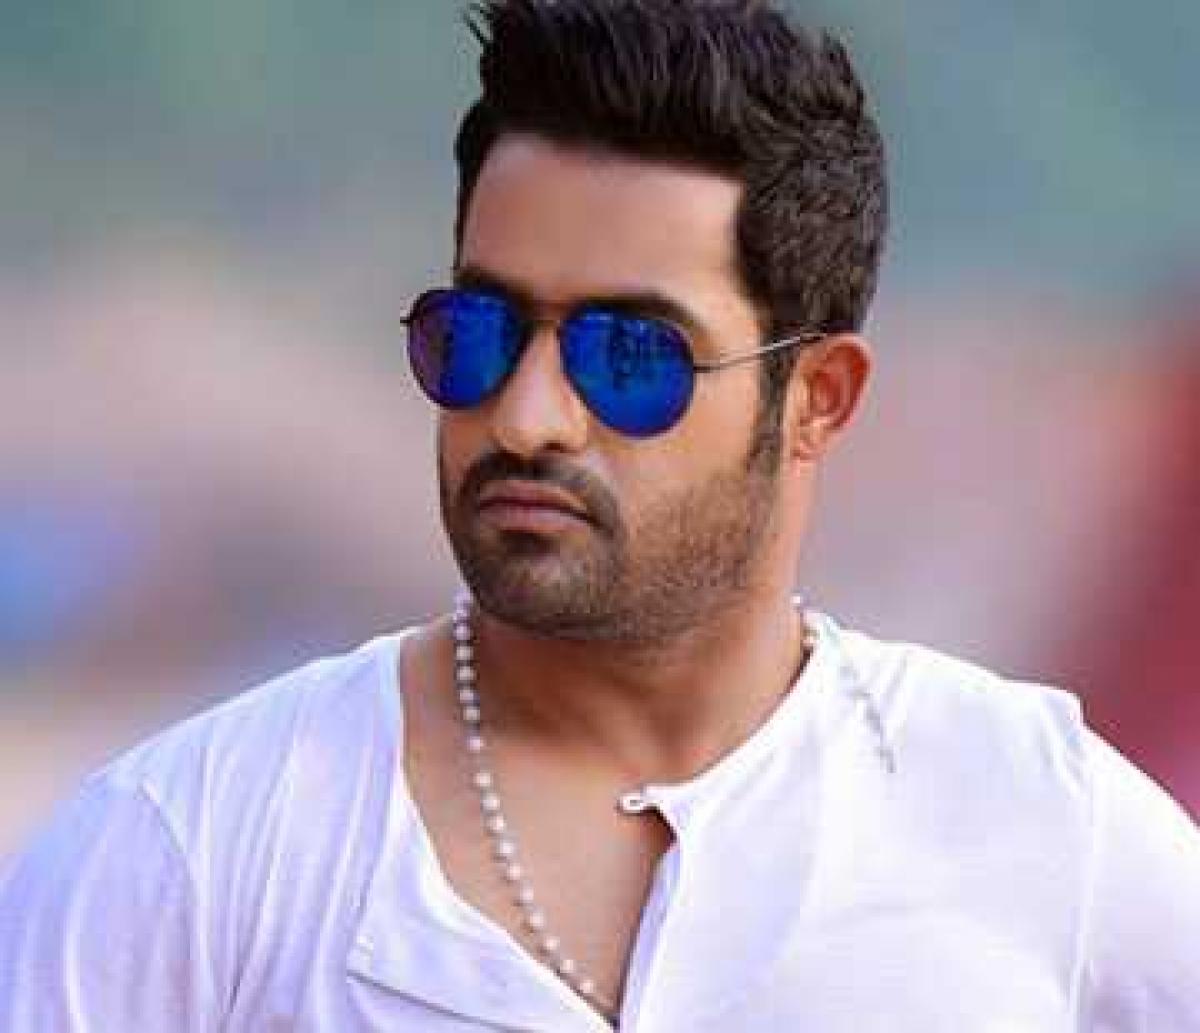 NTR turns hunk, gets a stylish makeover for Sukumar movie